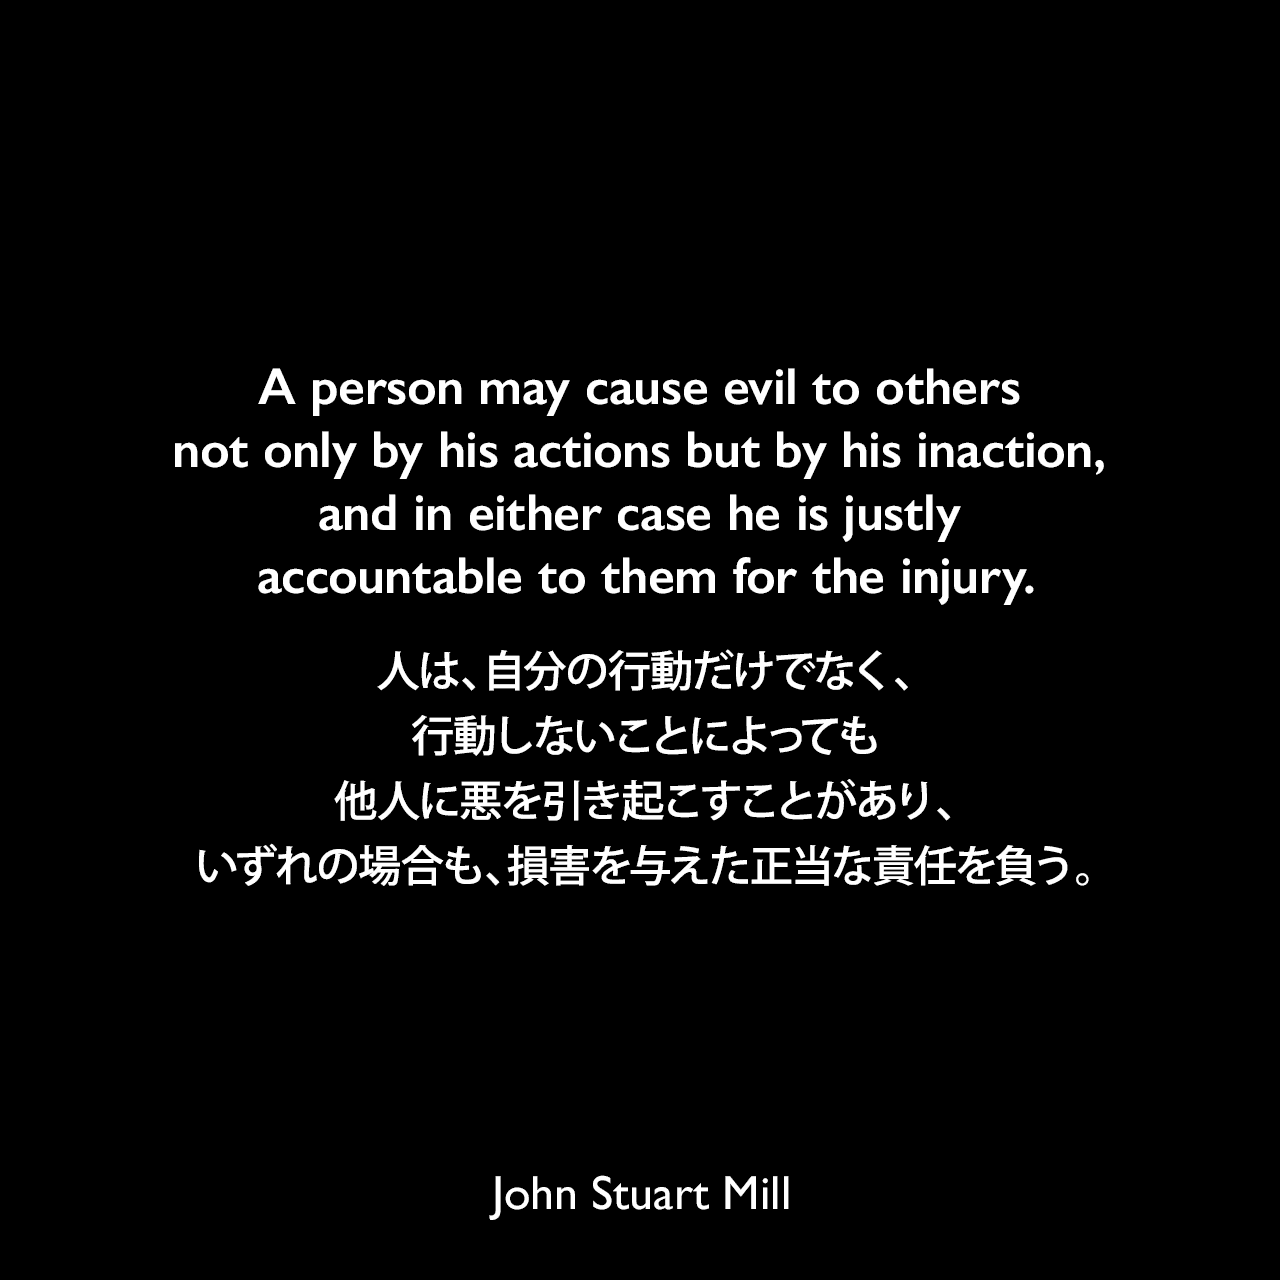 A person may cause evil to others not only by his actions but by his inaction, and in either case he is justly accountable to them for the injury.人は、自分の行動だけでなく、行動しないことによっても他人に悪を引き起こすことがあり、いずれの場合も、損害を与えた正当な責任を負う。- ジョン・スチュアート・ミルによる本「自由論」よりJohn Stuart Mill